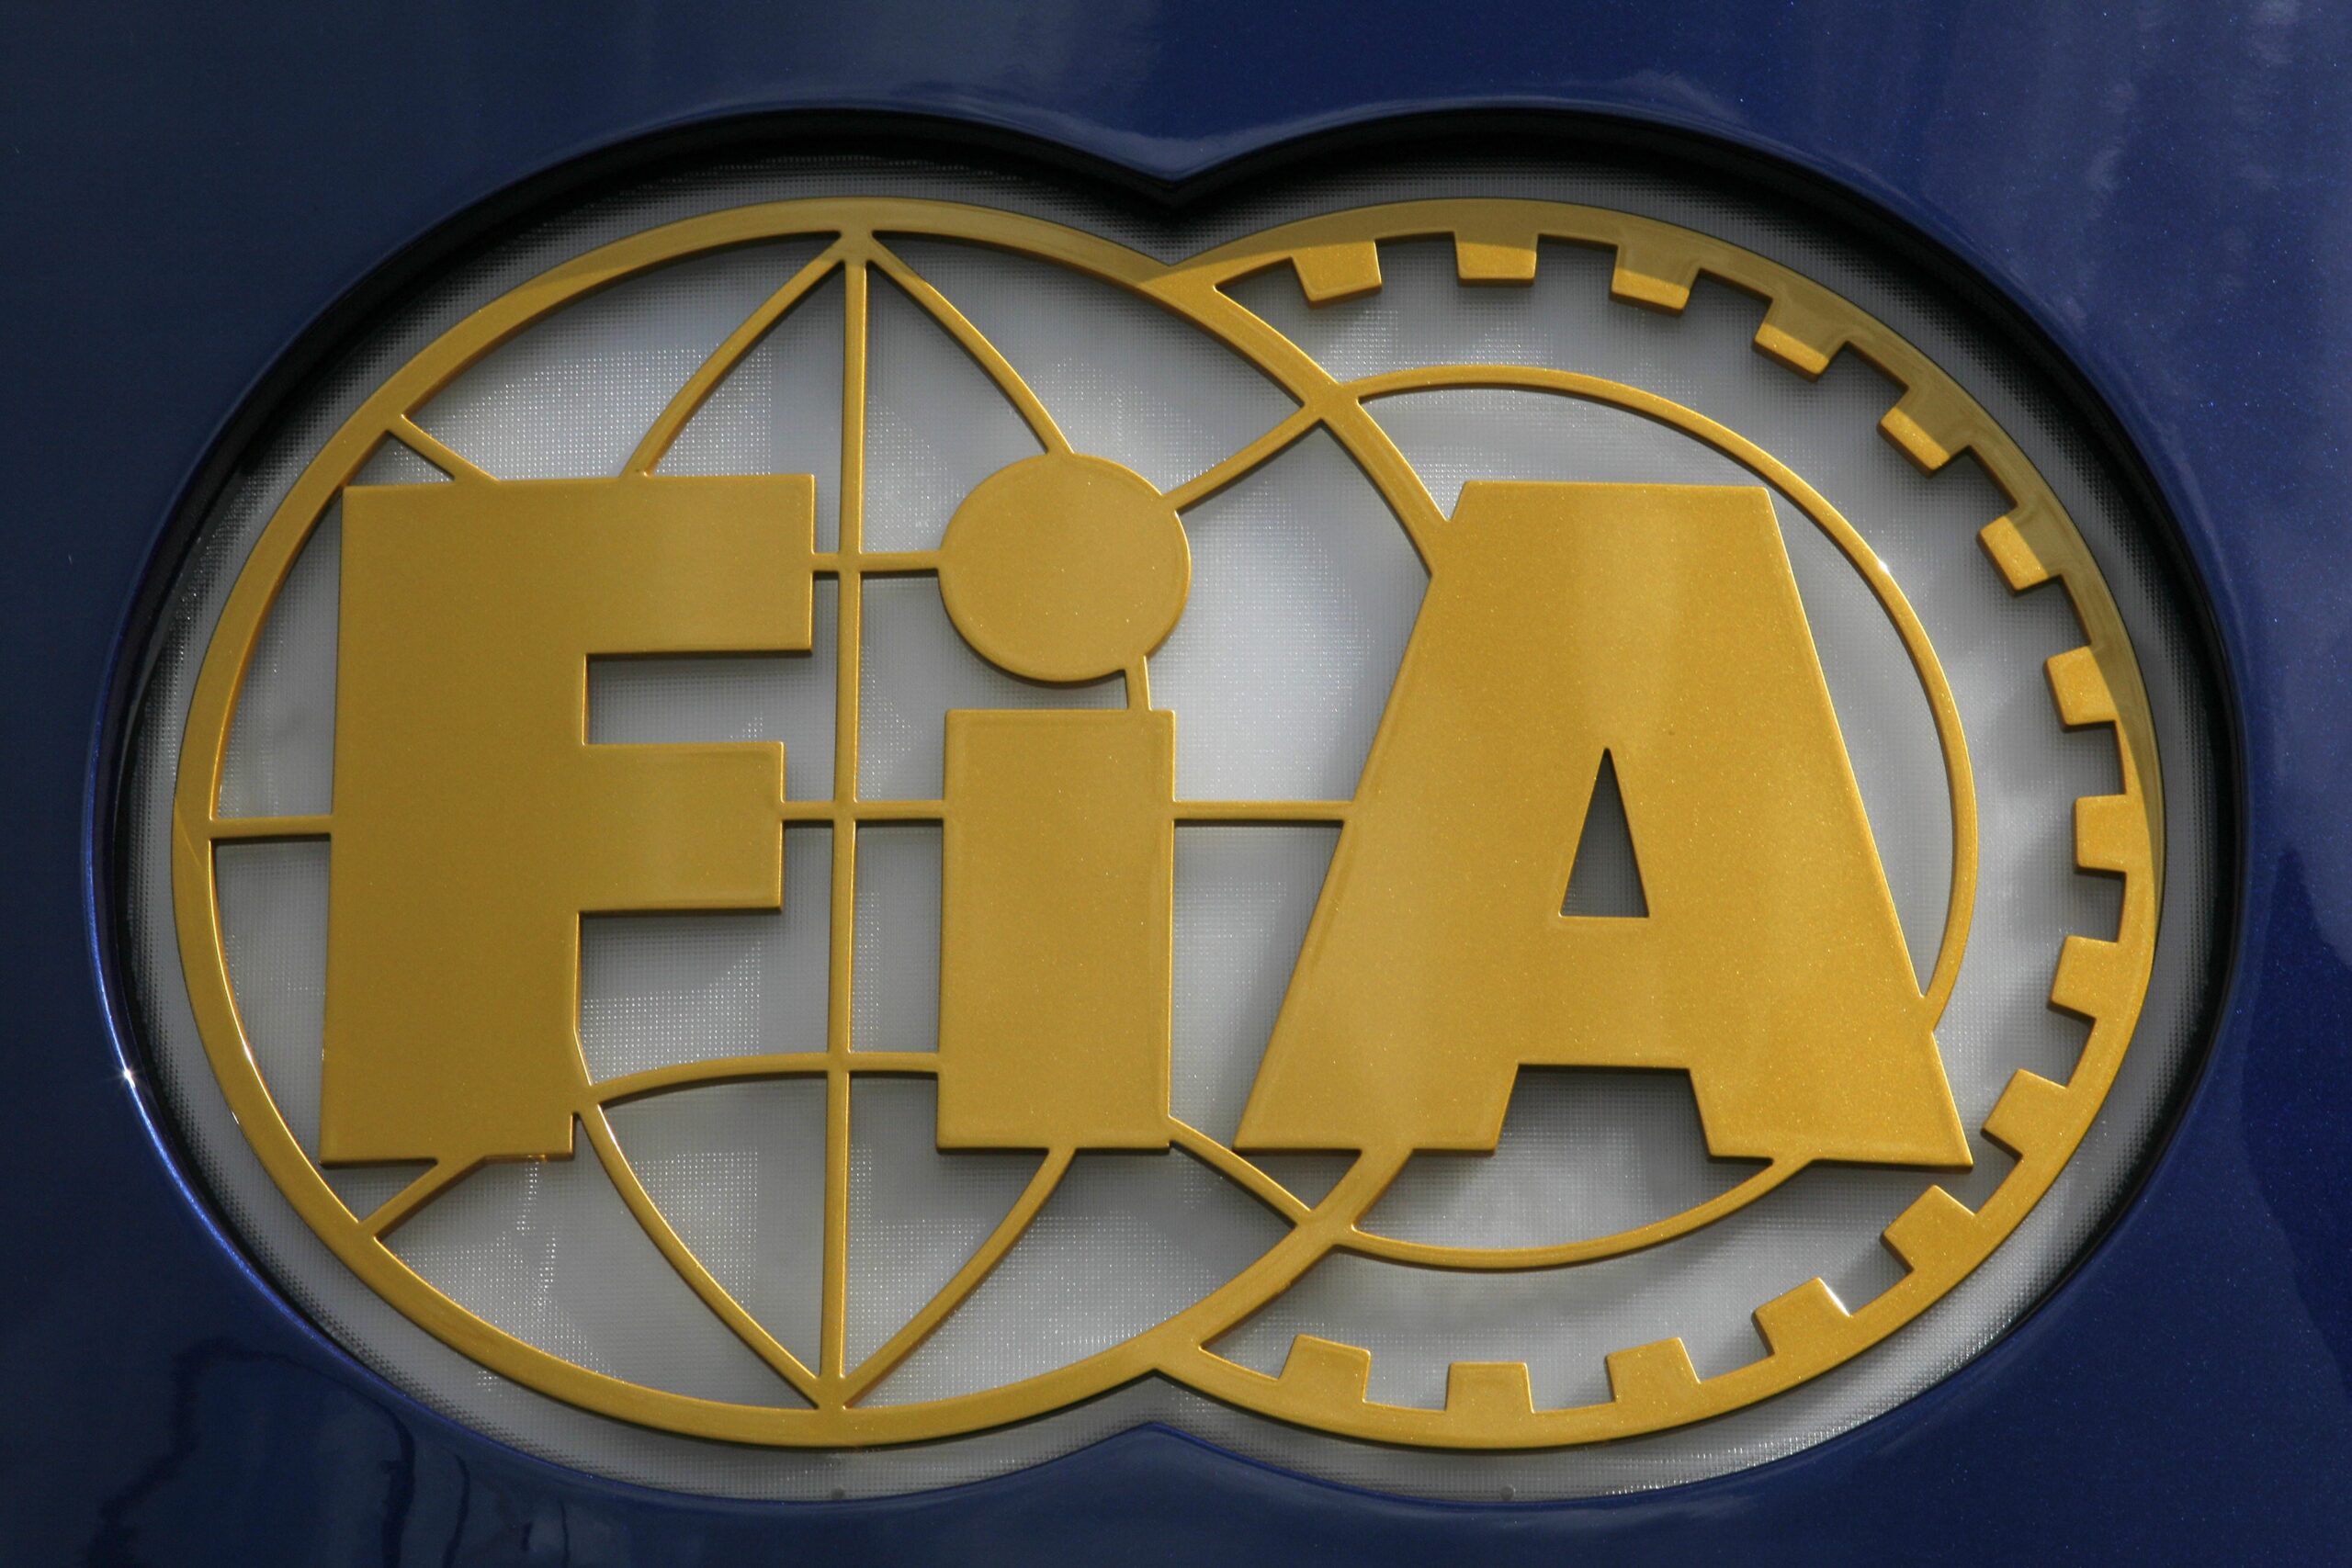 Picture of the FIA logo taken in the pad